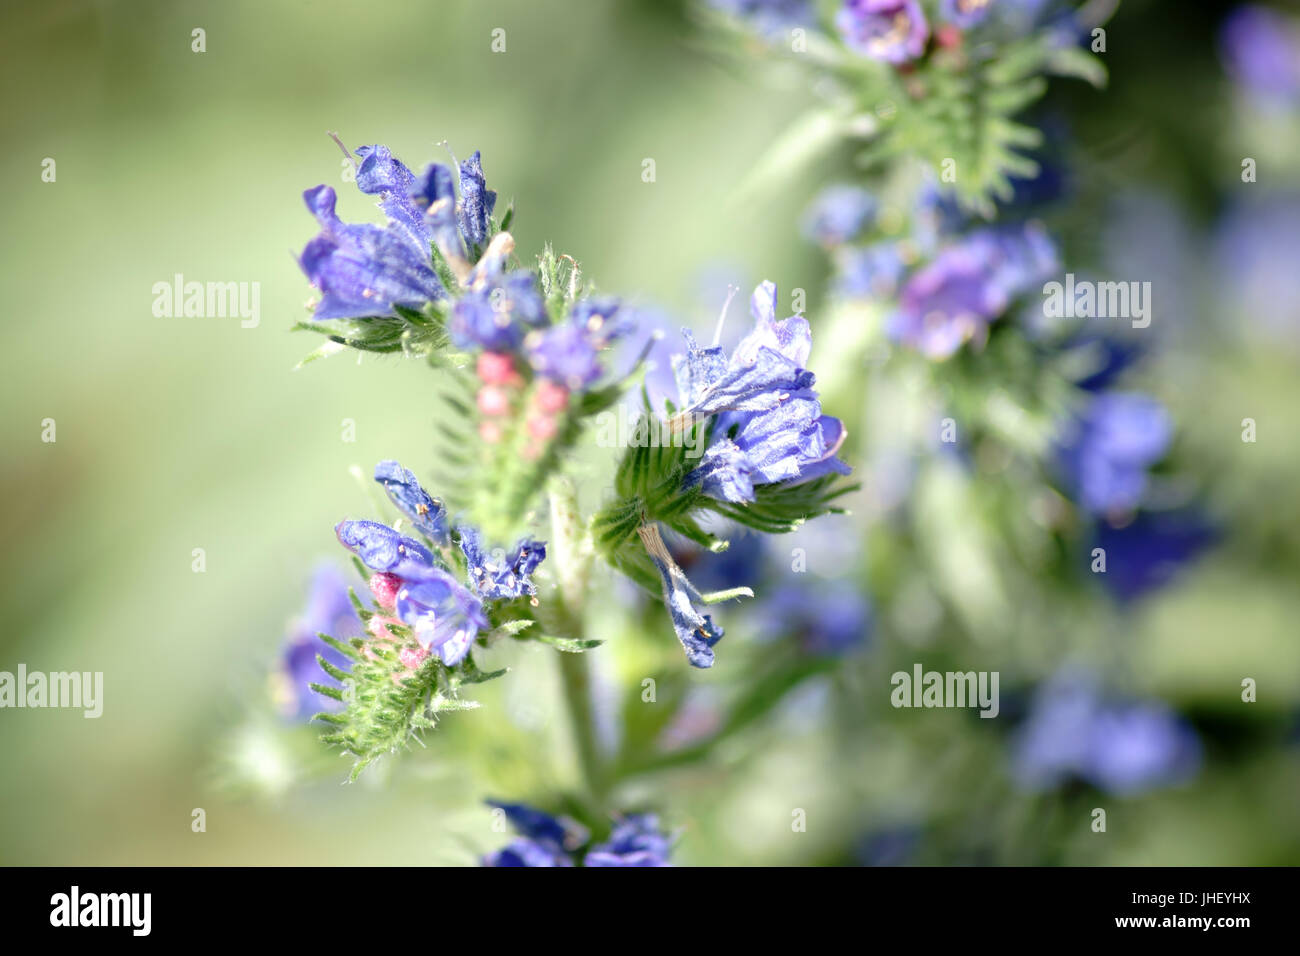 The closeup of the blue flowers of the herbaceous wild plant Blueweed or Vipers bugloss. Stock Photo